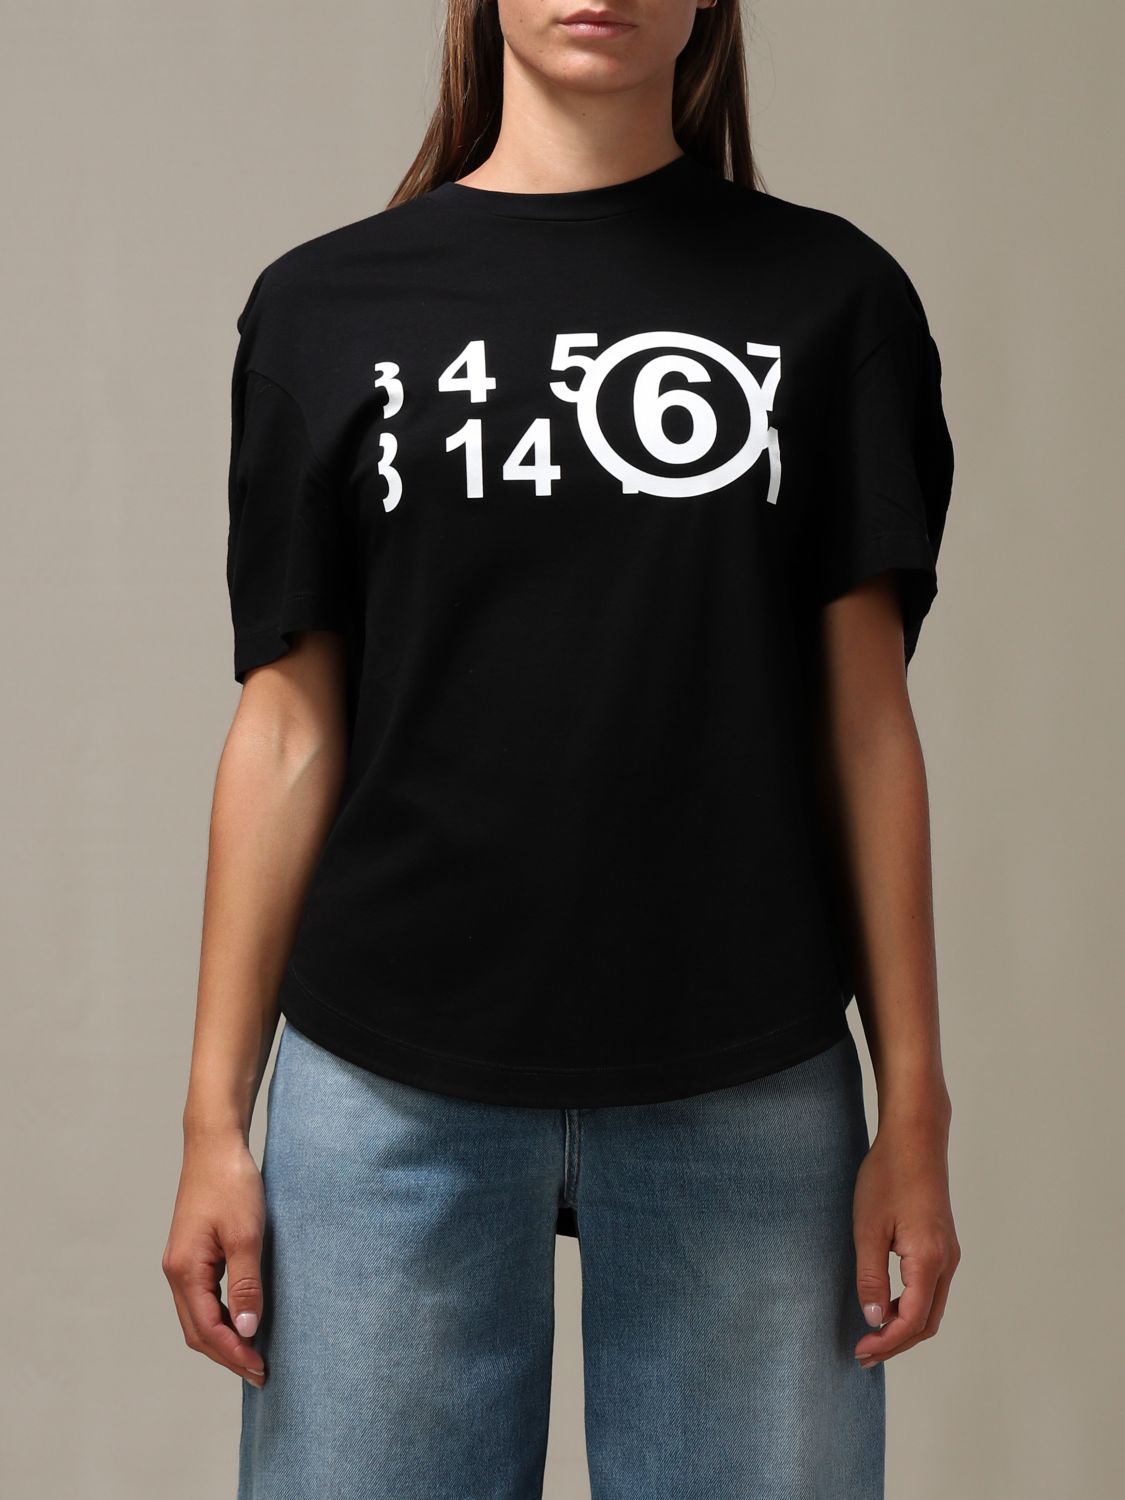 MM6 MAISON MARGIELA: T-shirt with numbers print - Black | Mm6